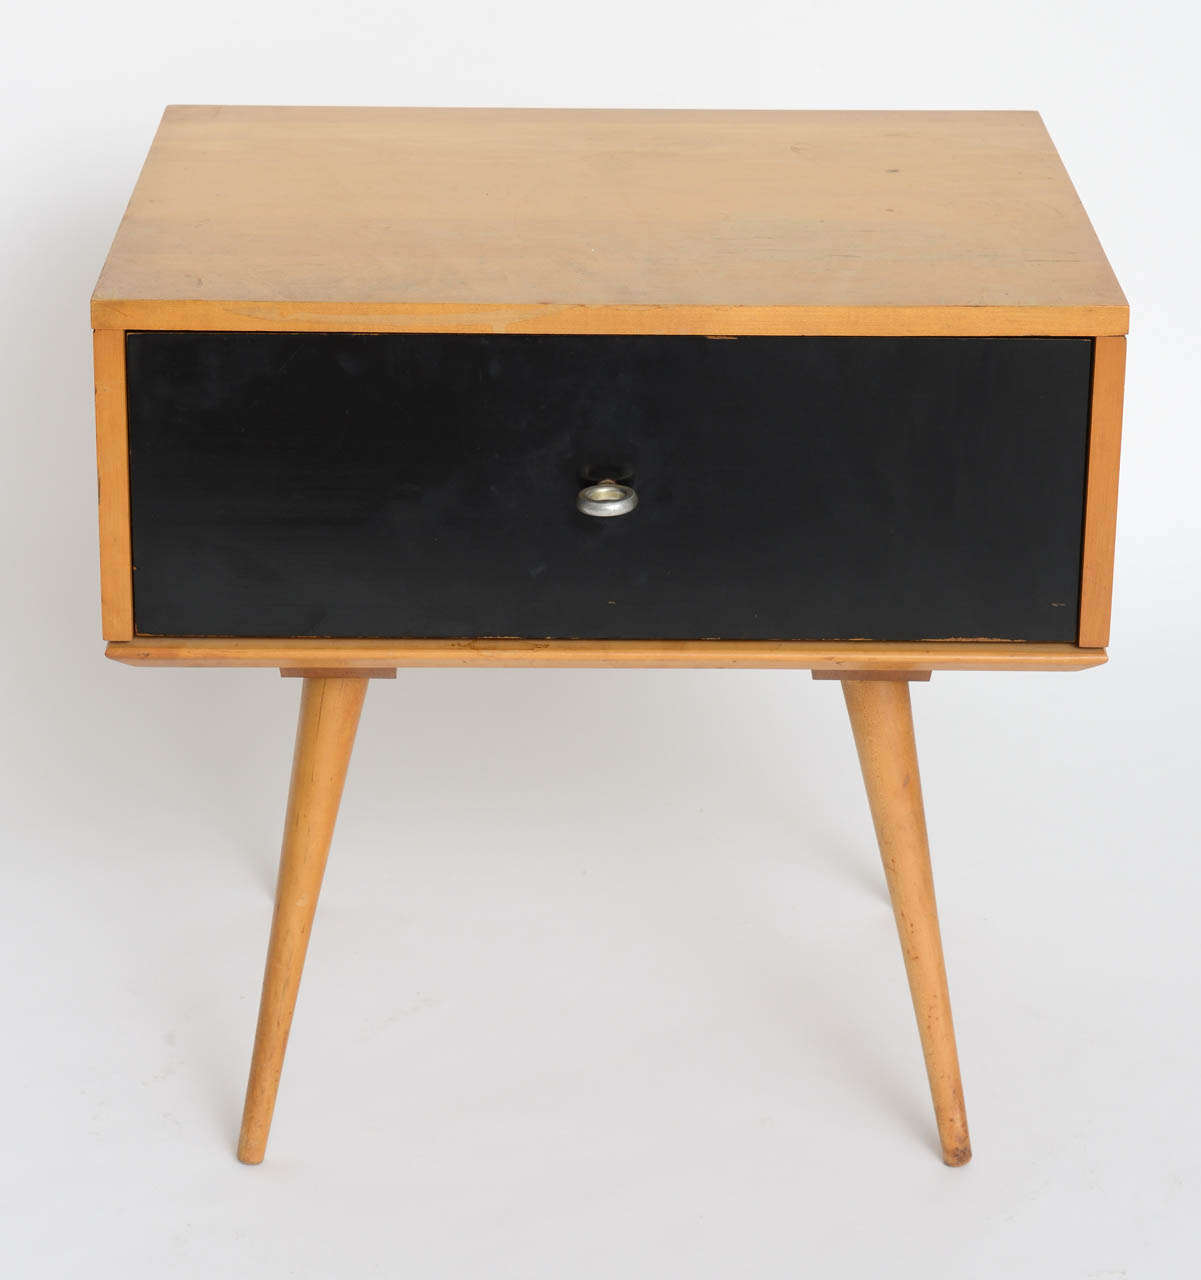 Beautiful Paul McCobb Planner Group Single drawer nightstand in solid maple.